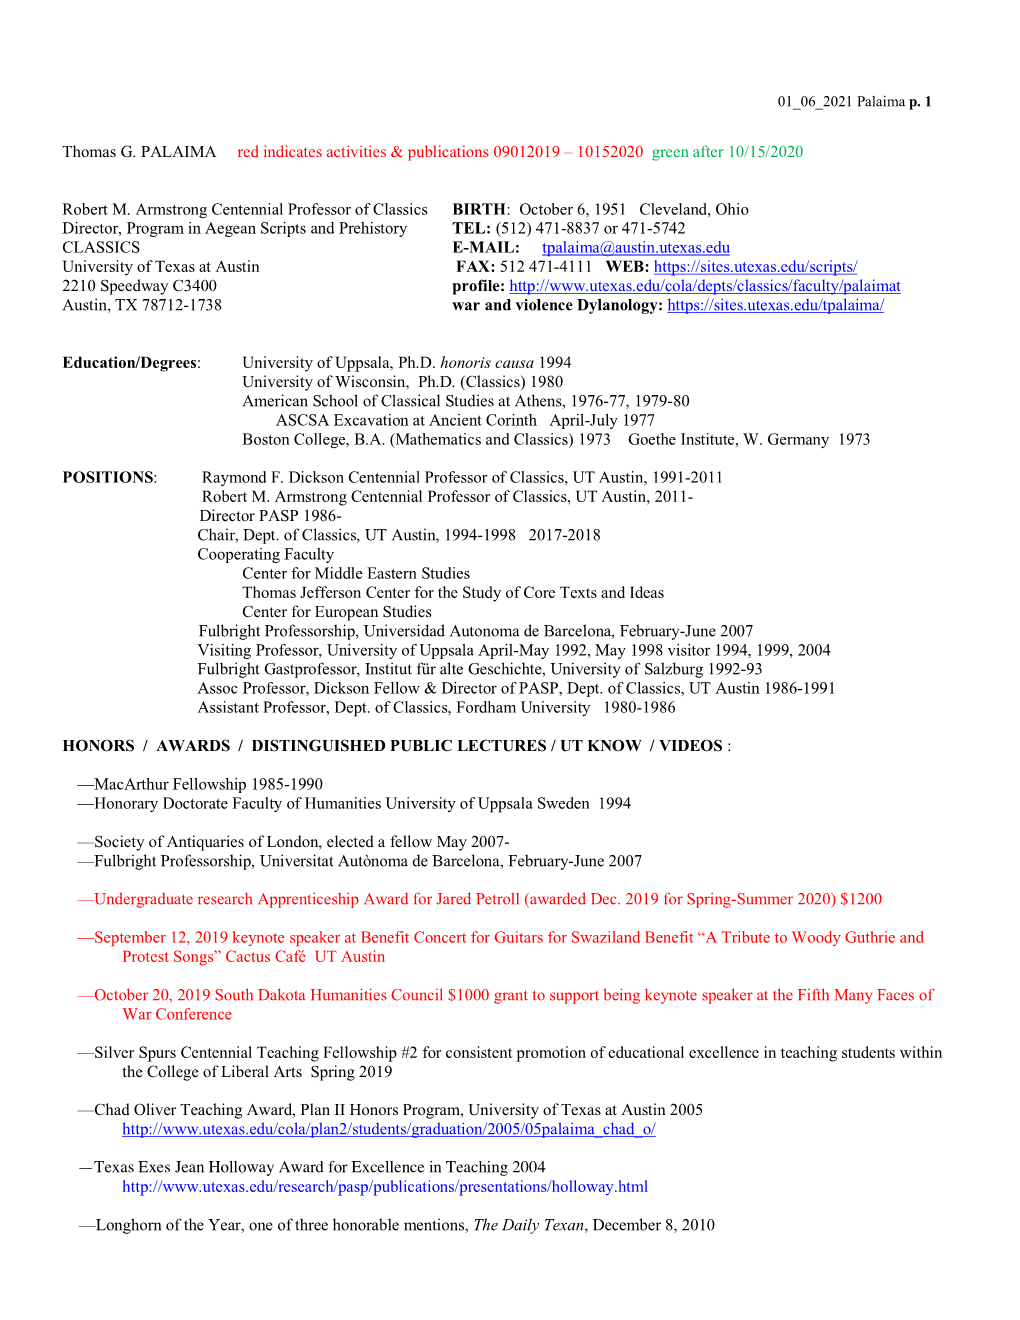 Thomas G. PALAIMA Red Indicates Activities & Publications 09012019 – 10152020 Green After 10/15/2020